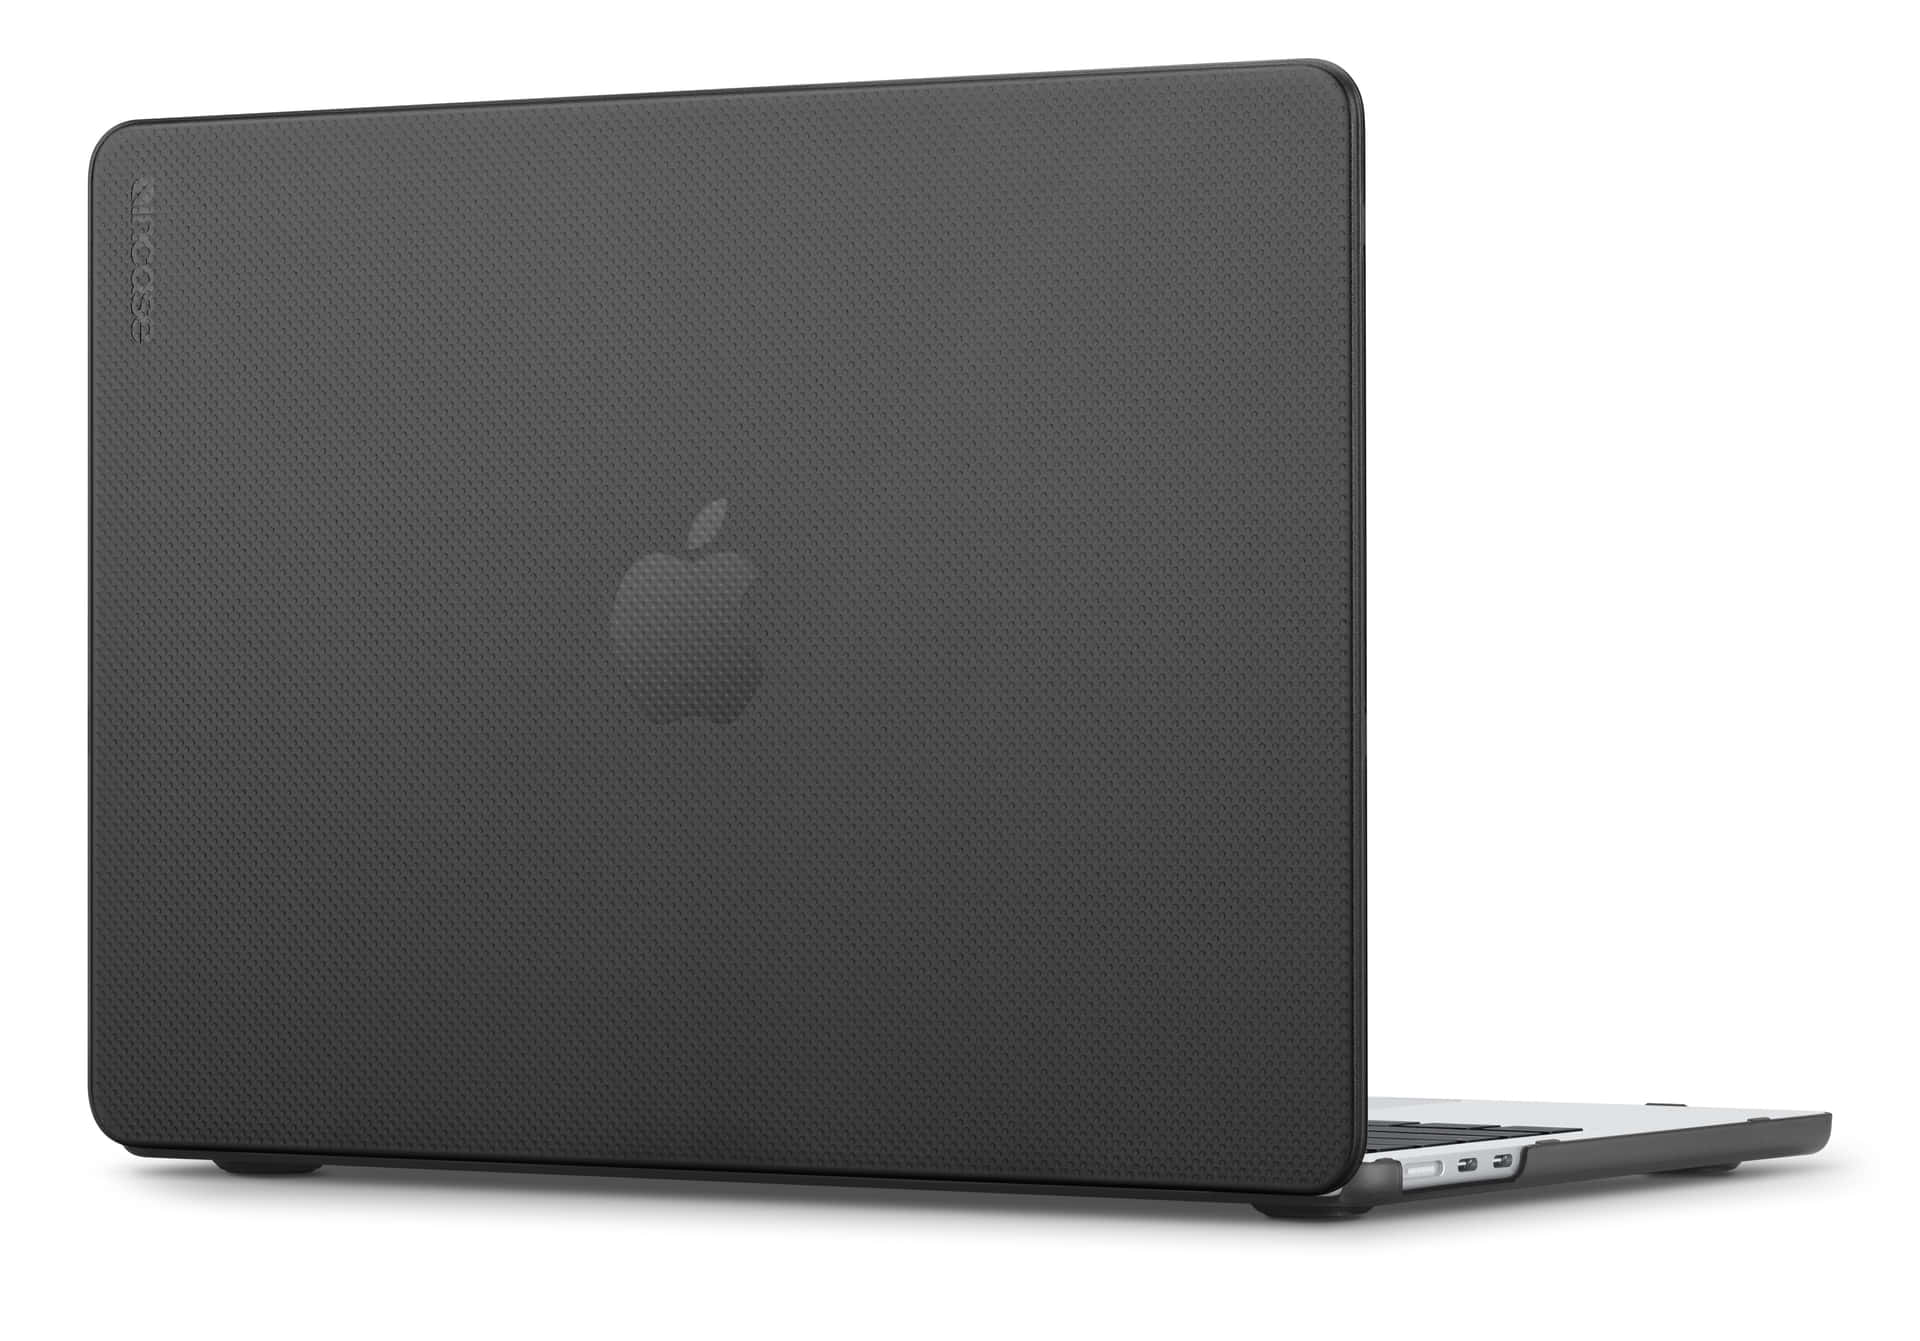 Show off your style with the Black MacBook. Wallpaper